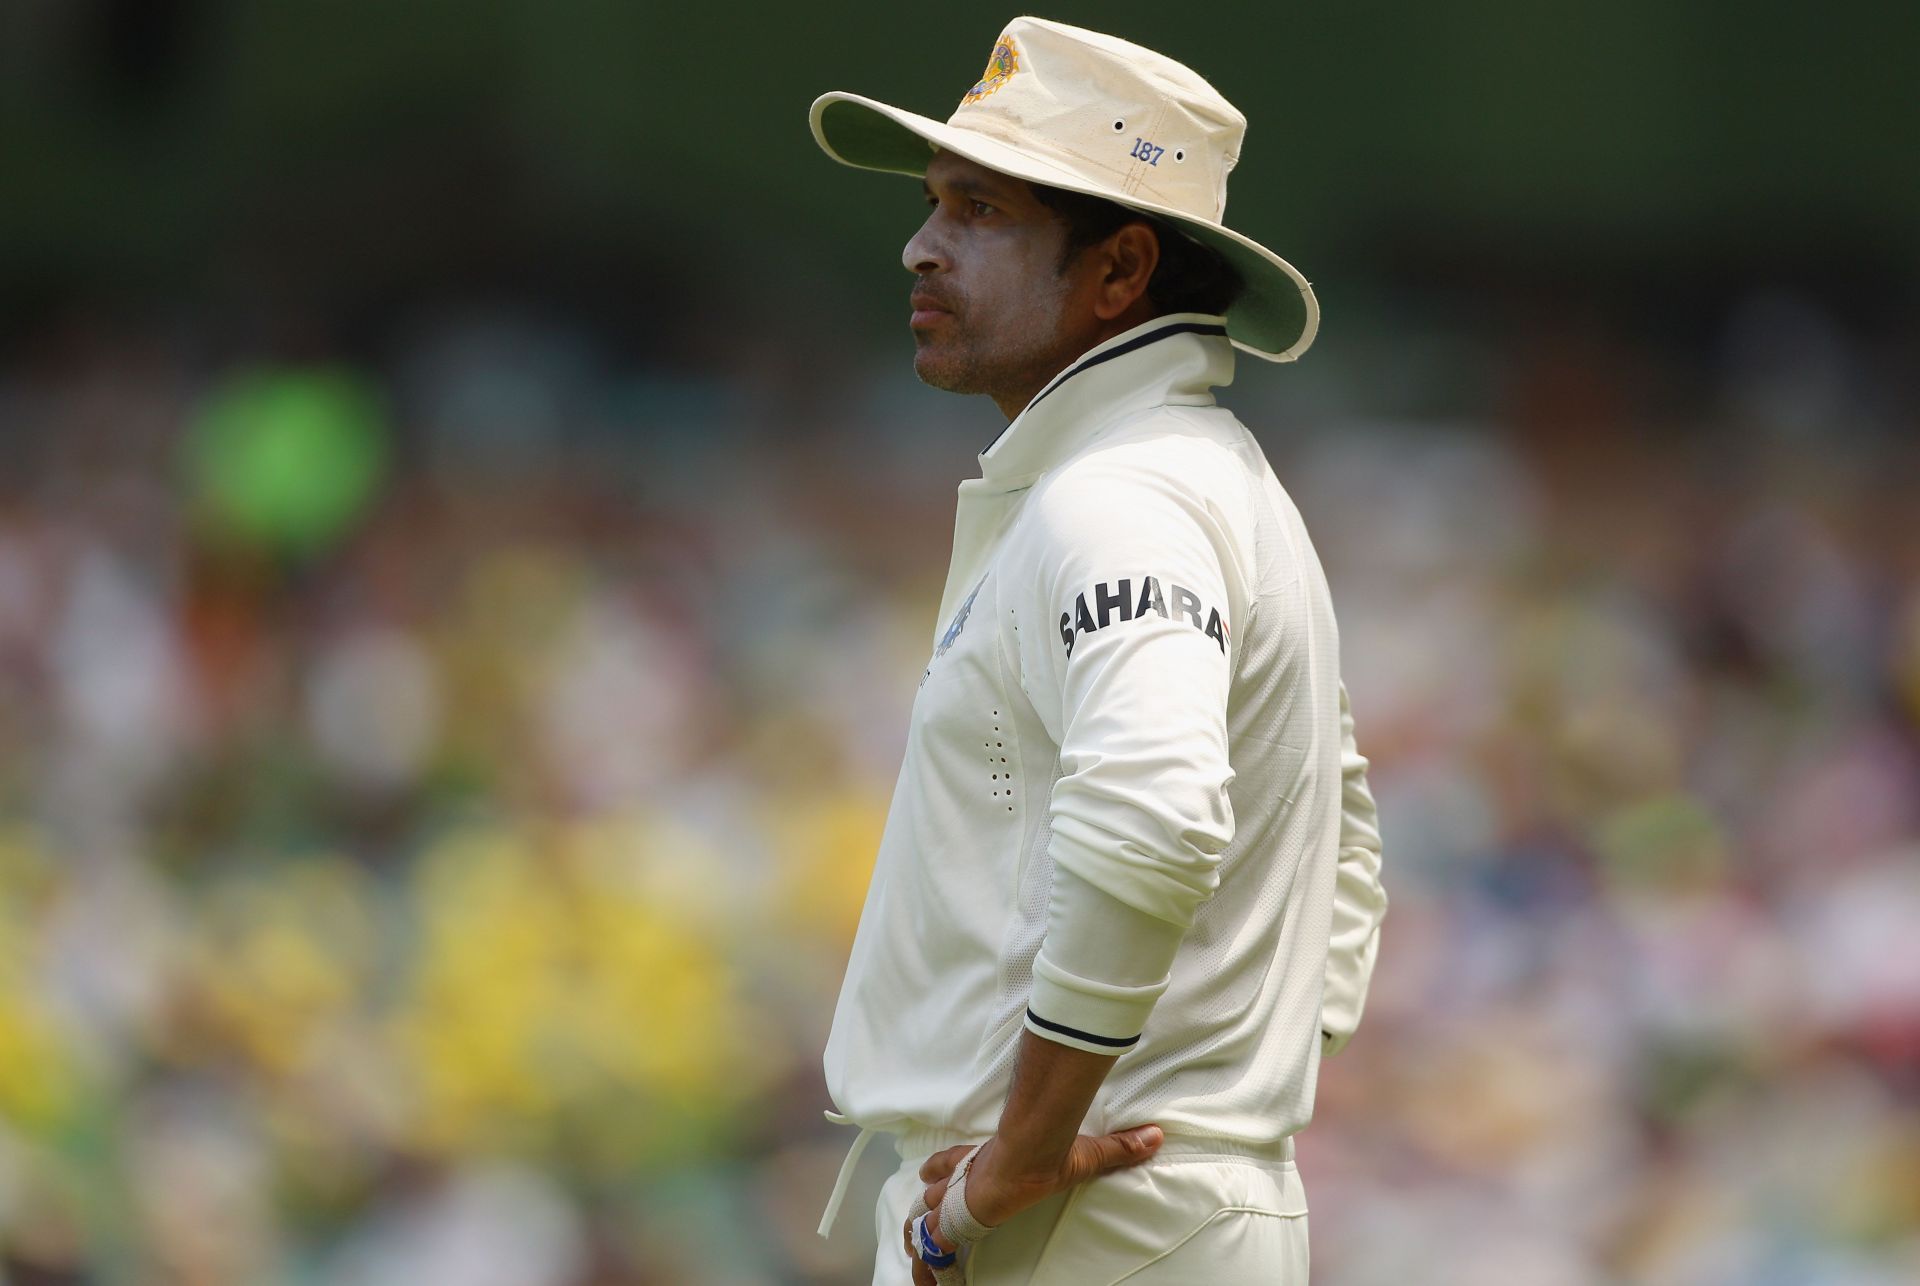 Sachin Tendulkar spoke about the difference in facing the new ball and when it gets older.